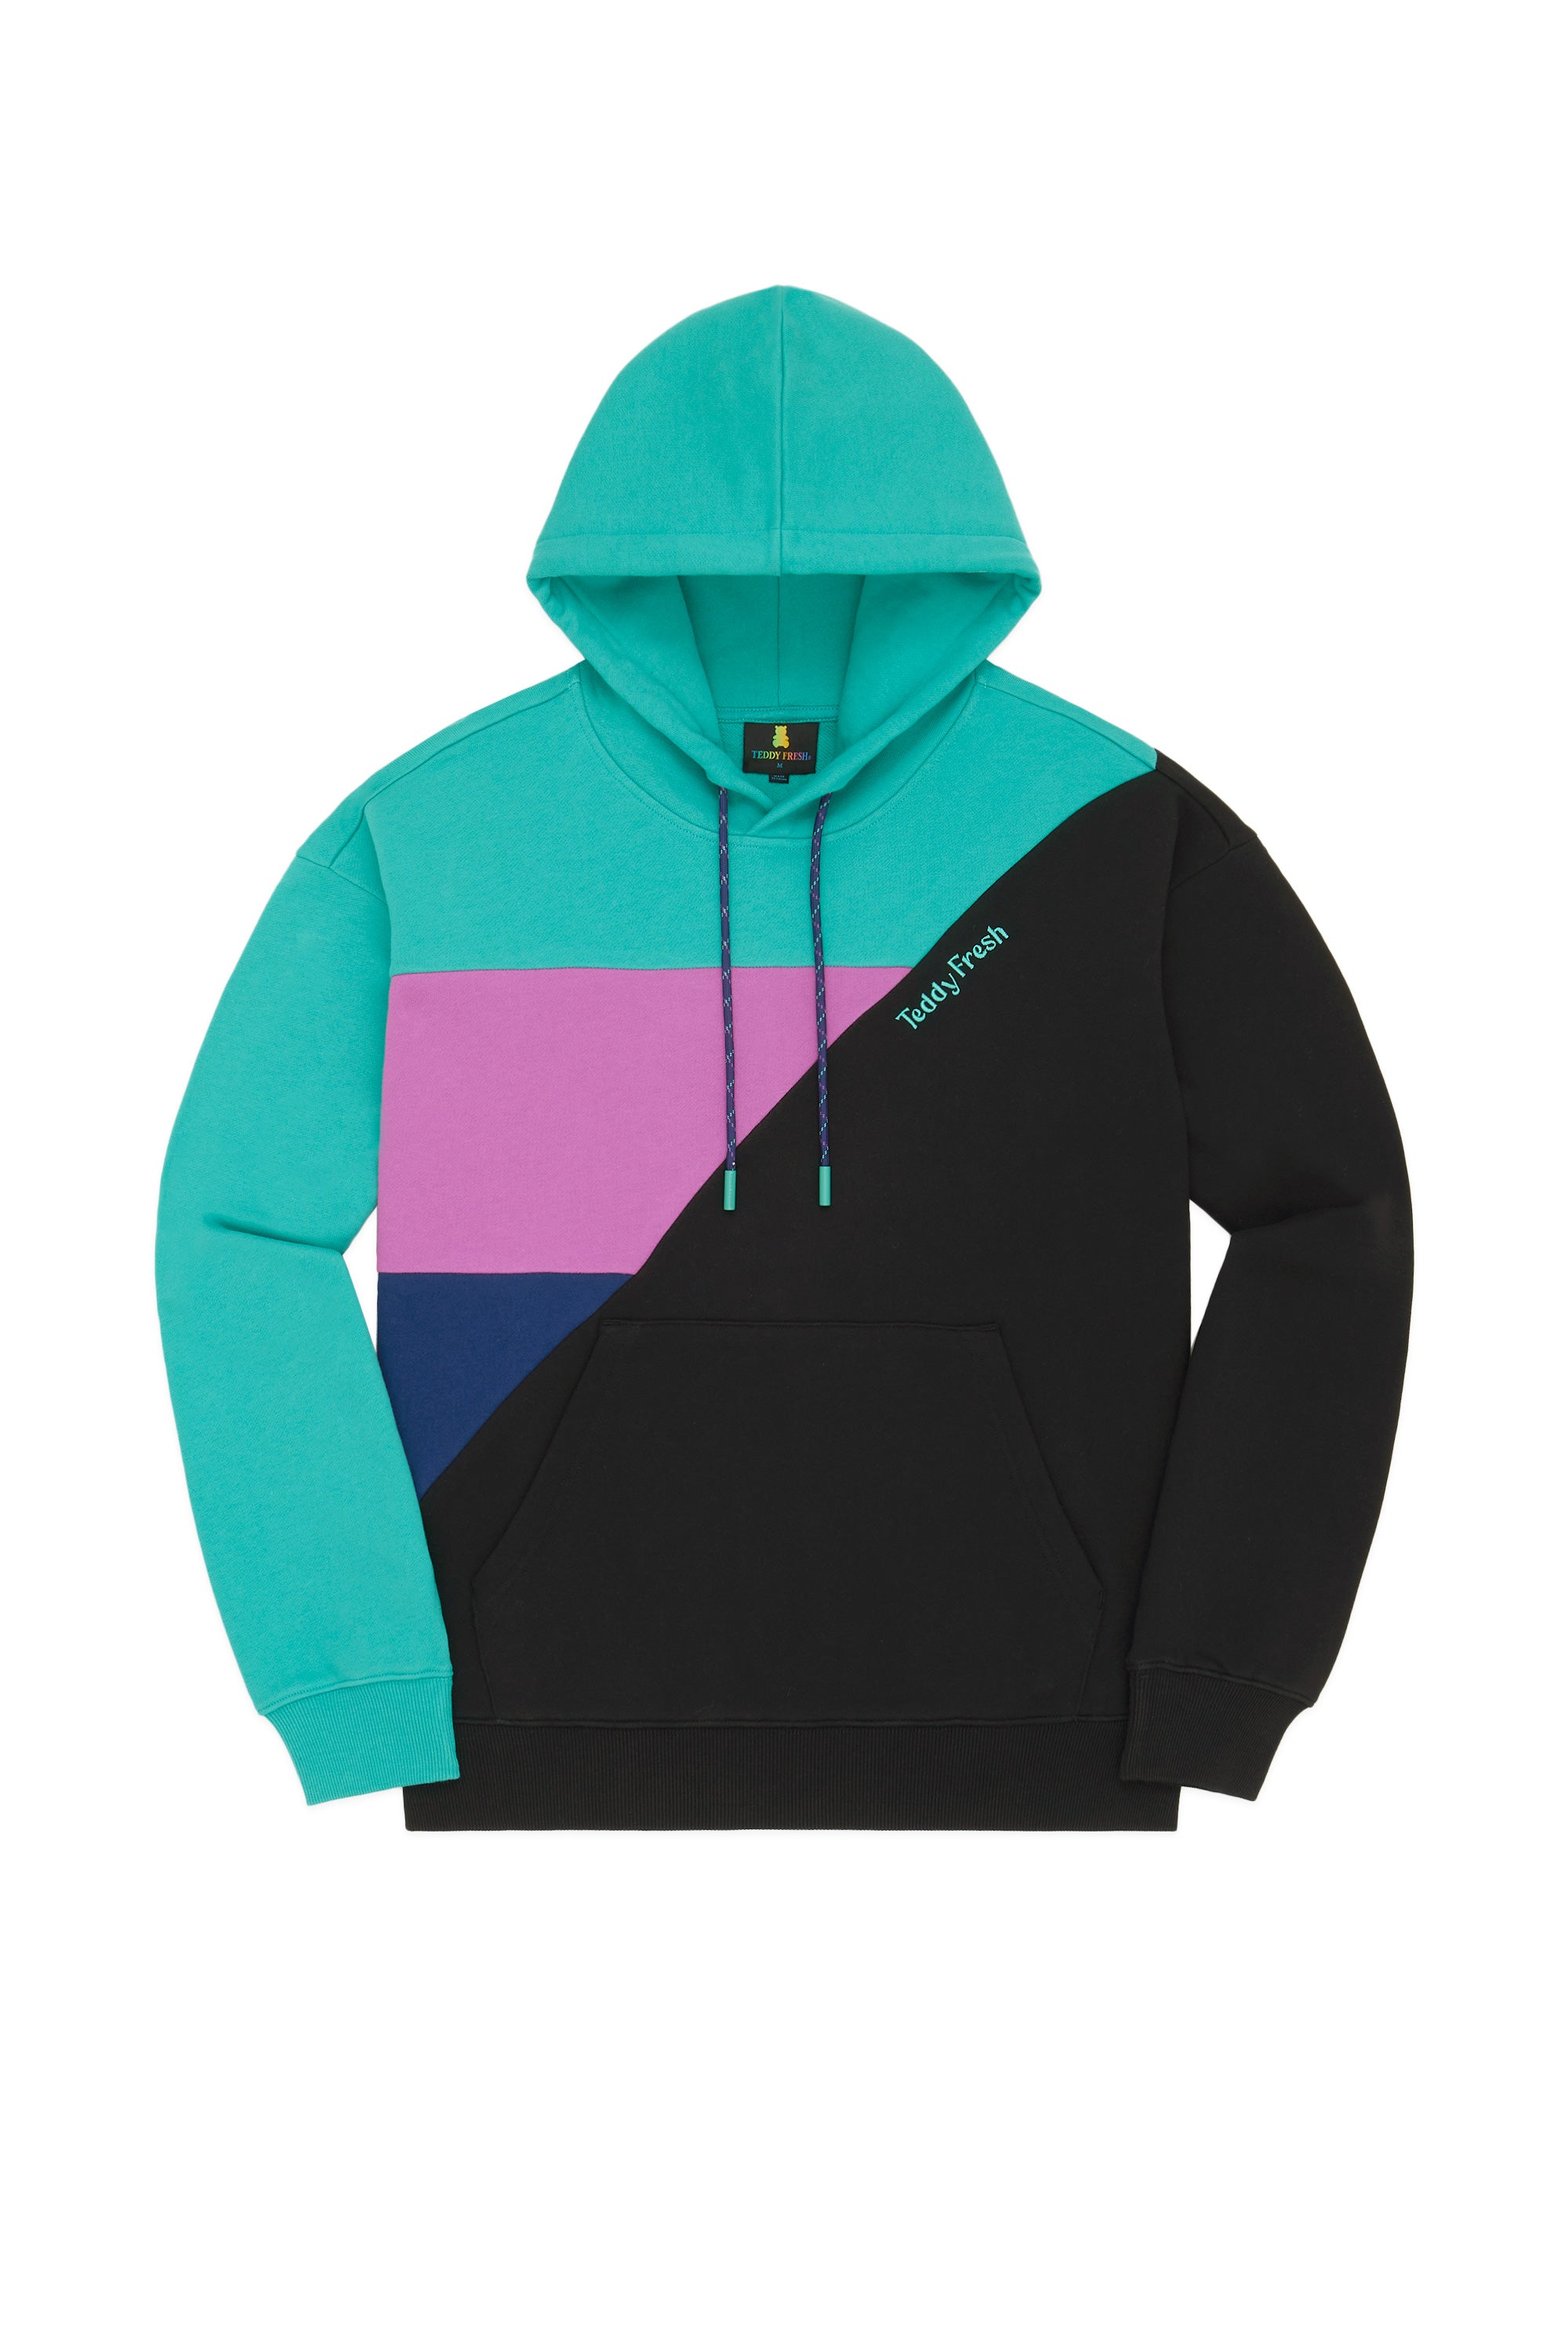 Teddy Fresh - We made this hoodie in collaboration with